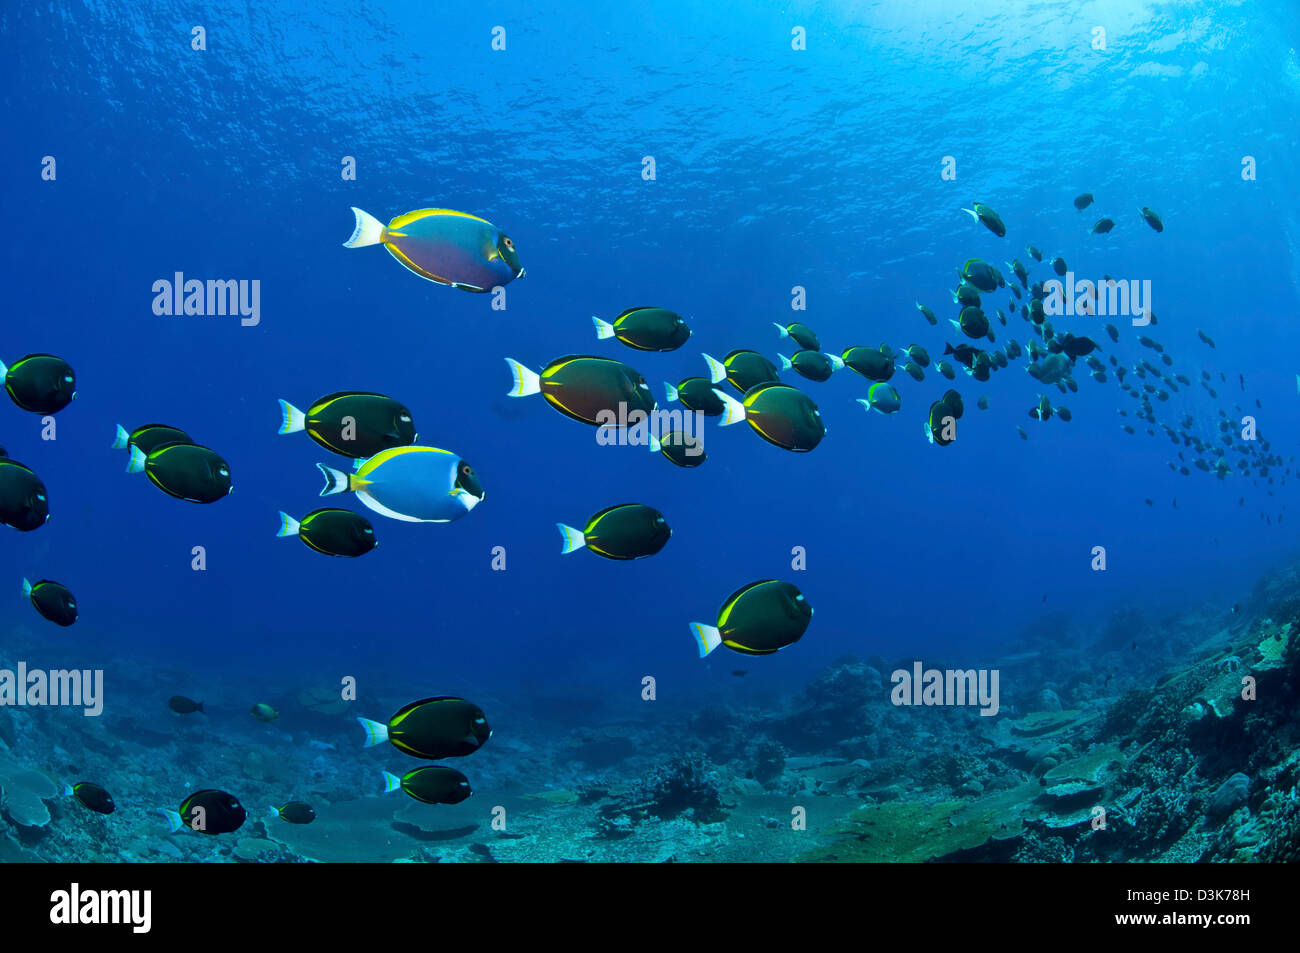 School of black, white, yellow and blue surgeonfish stretching in the distance, Christmas Island, Australia. Stock Photo